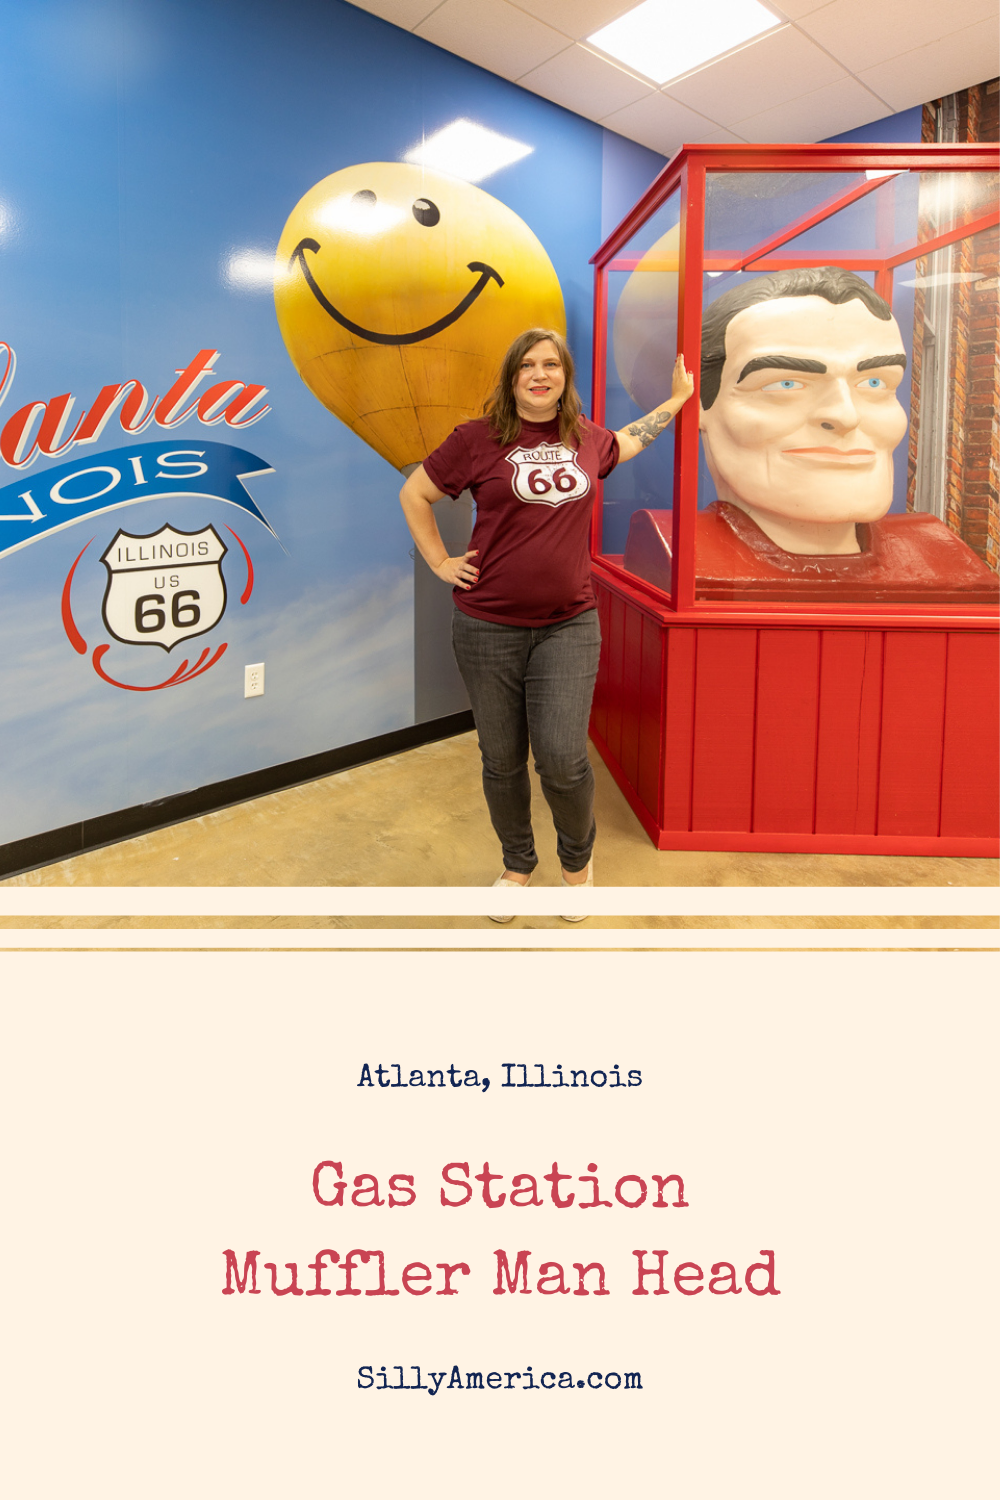 This muffler man is a head above the rest. Or, at least, is a head. Find this gas station muffler man head in Atlanta, Illinois on Route 66. Add it to your travel itinerary and visit the Illinois roadside attraction on your Route 66 road trip.   #RoadTrips #RoadTripStop #Route66 #Route66RoadTrip #IllinoisRoute66 #Illinois #IllinoisRoadTrip #IllinoisRoadsideAttractions #RoadsideAttractions #RoadsideAttraction #RoadsideAmerica #RoadTrip #MufflerMan